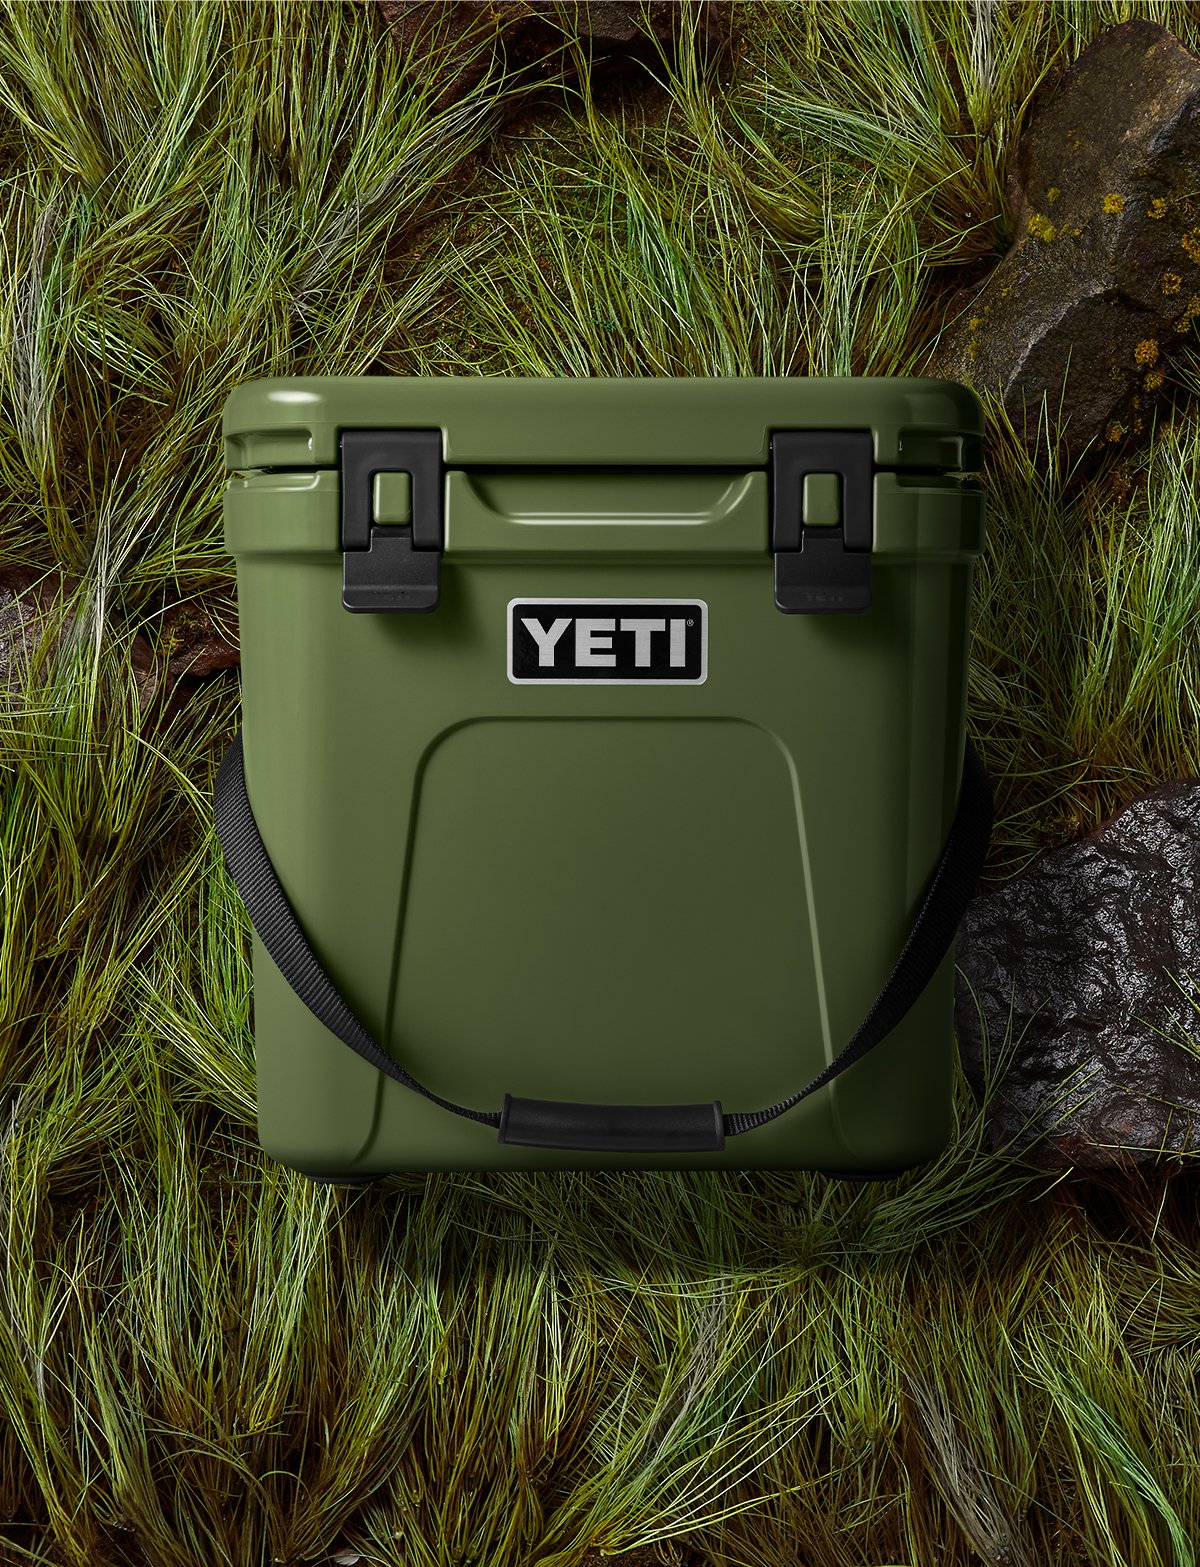 YETI: Limited Edition: Hard Coolers in New Colors